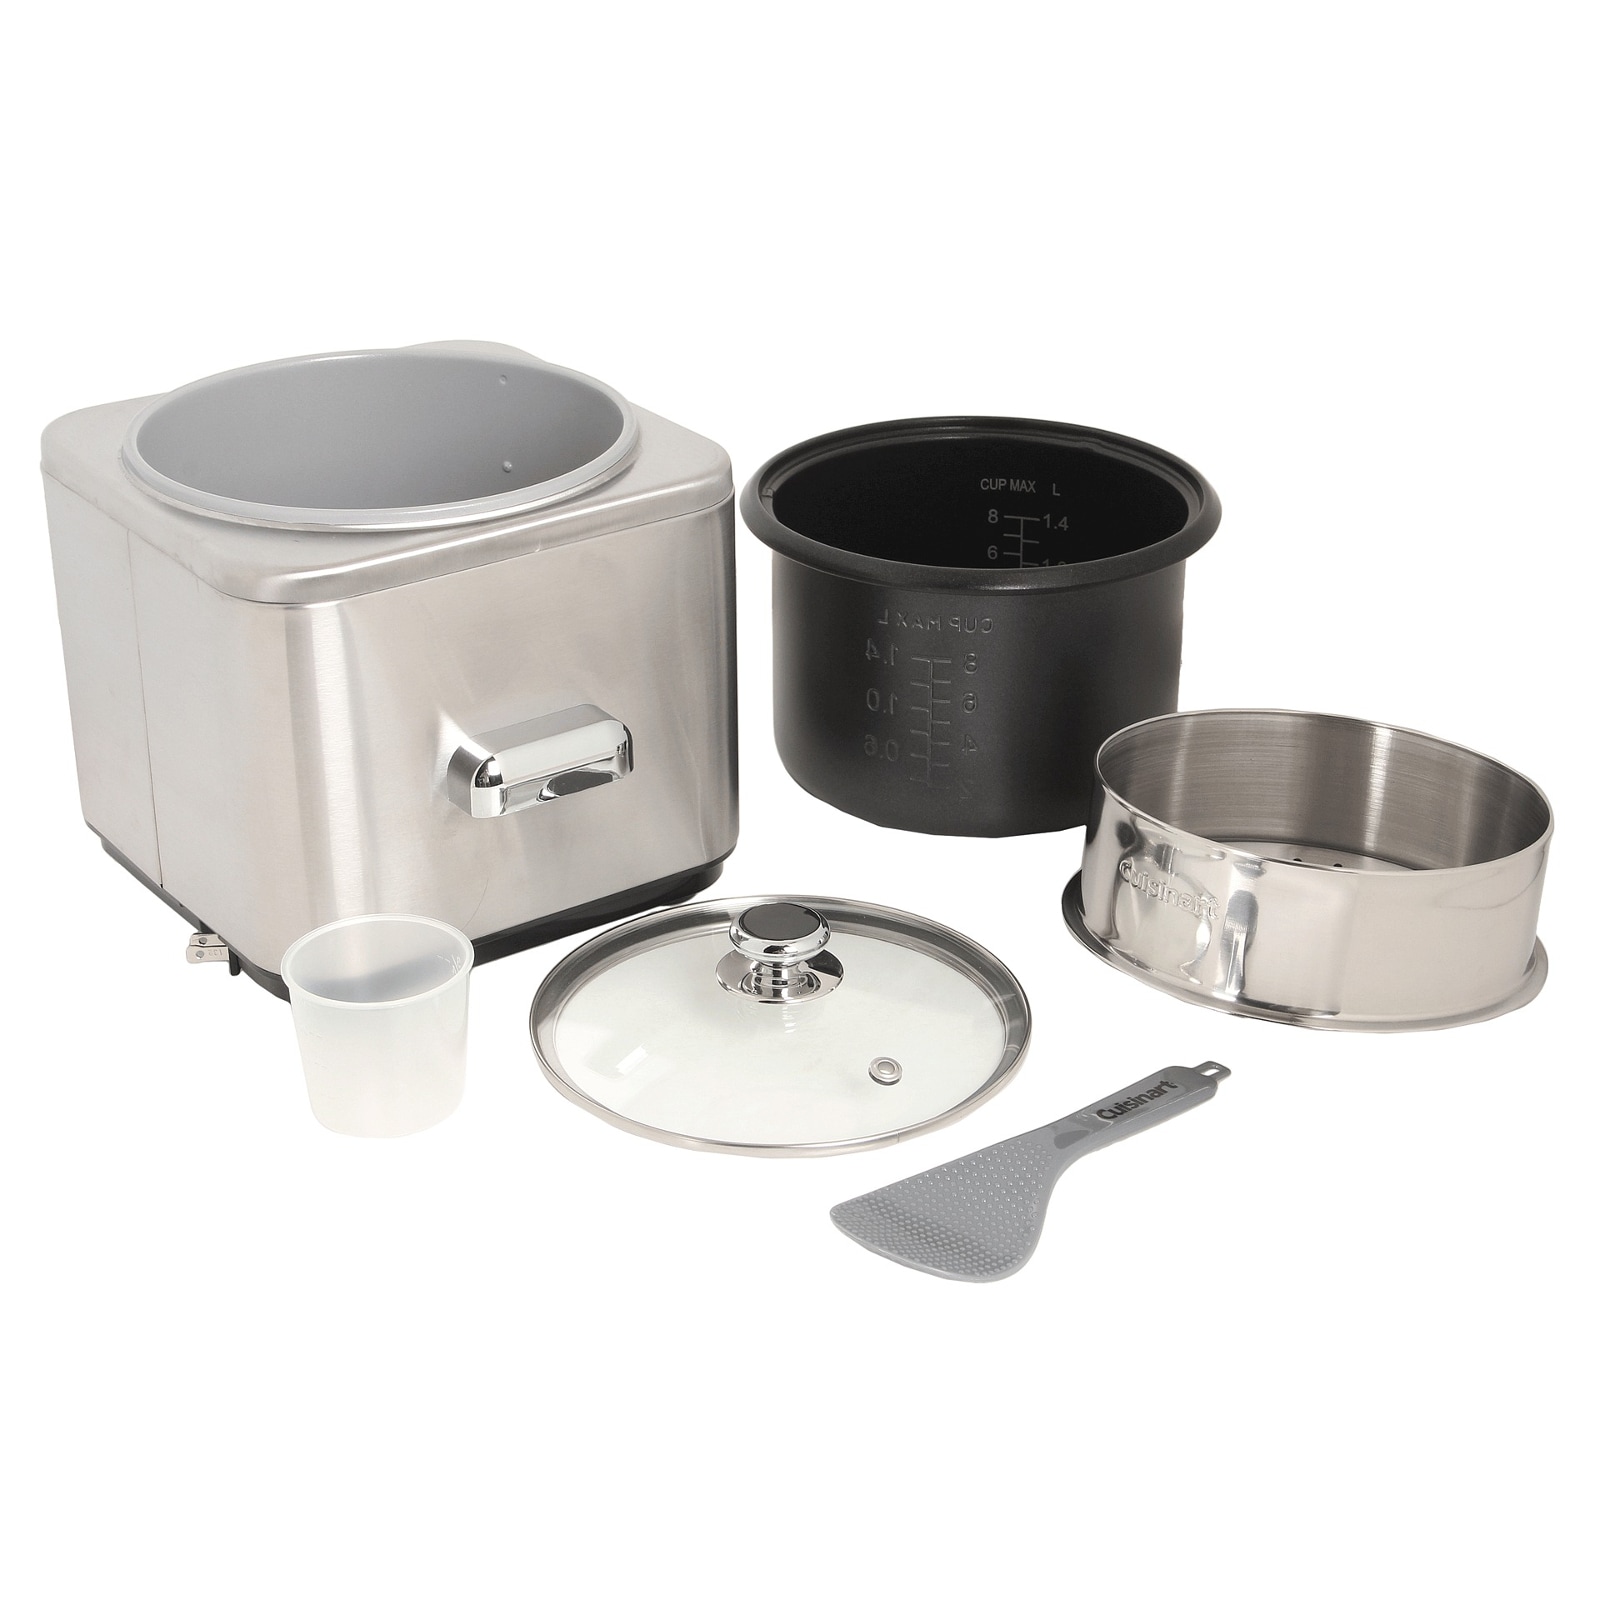 https://ak1.ostkcdn.com/images/products/4216805/Cuisinart-CRC-800-Brushed-Stainless-Steel-8-cup-Rice-Cooker-4f0b548a-2655-4b66-8163-31761a198dcb.jpg